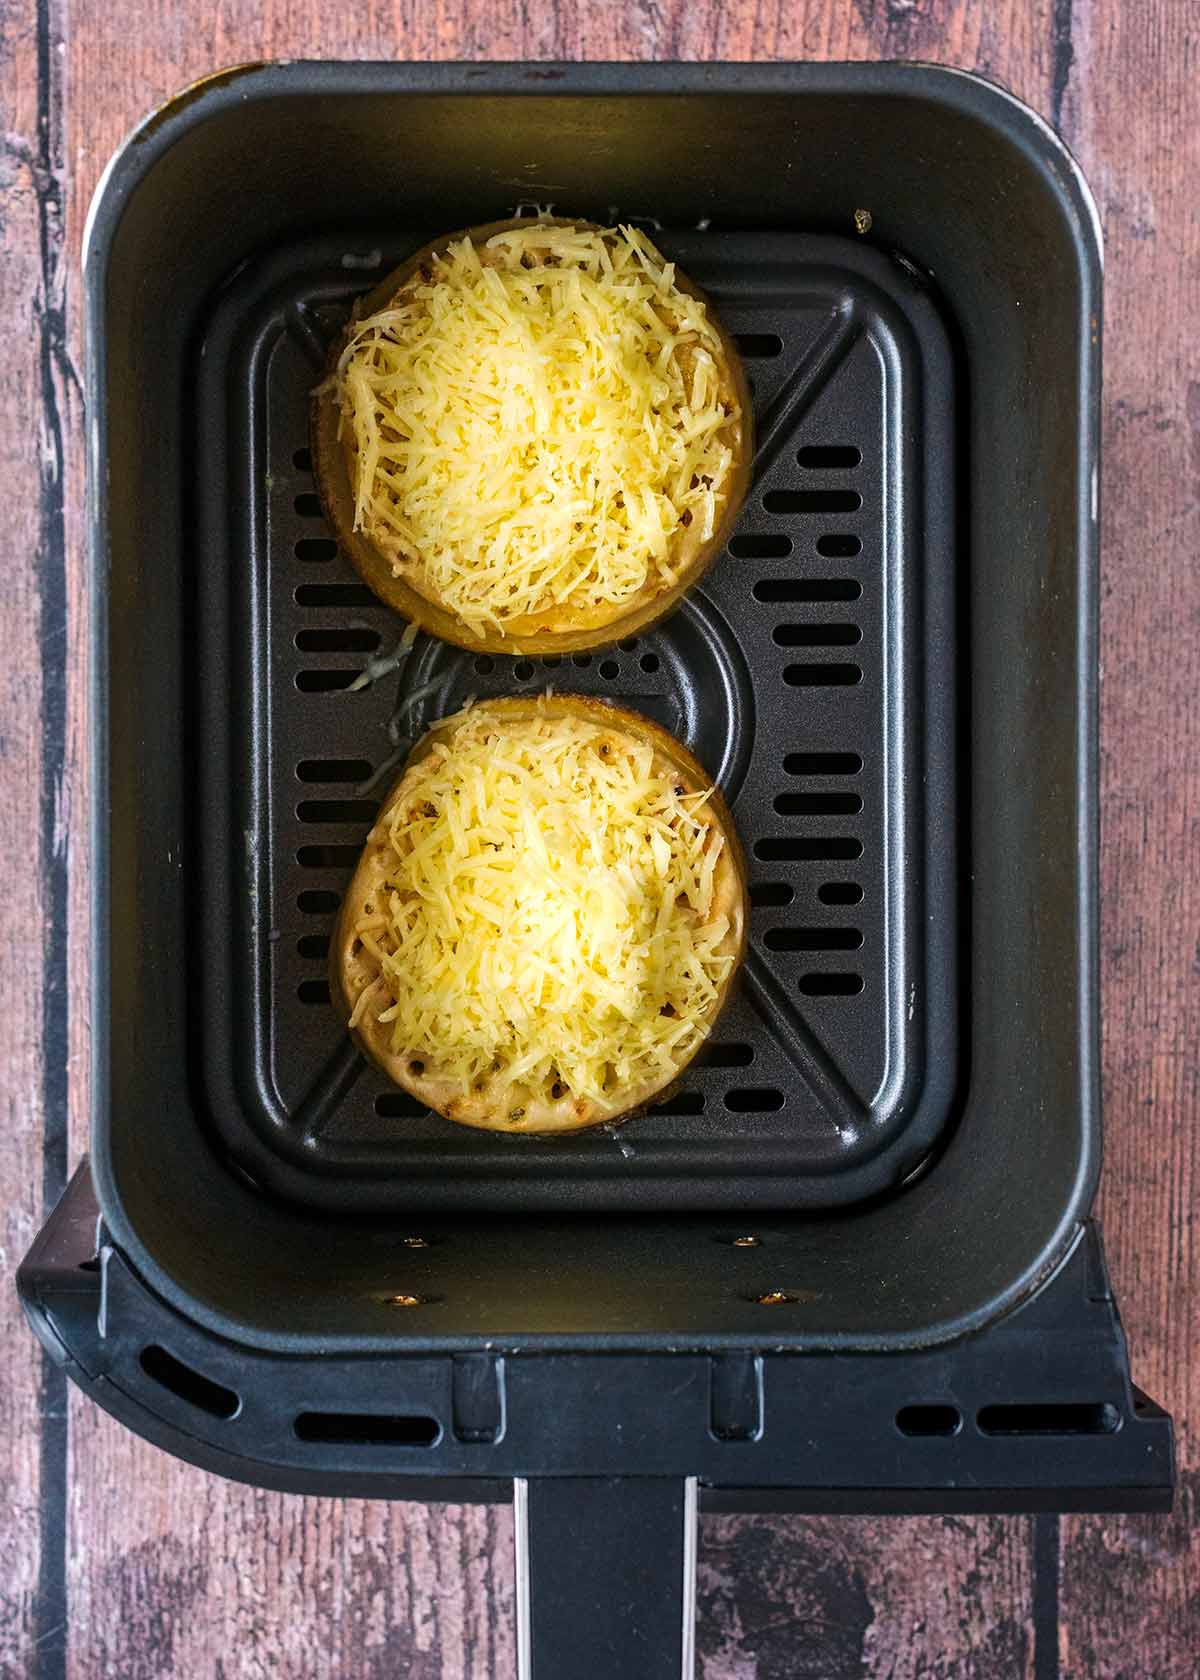 Grated cheese sprinkled over the crumpets.